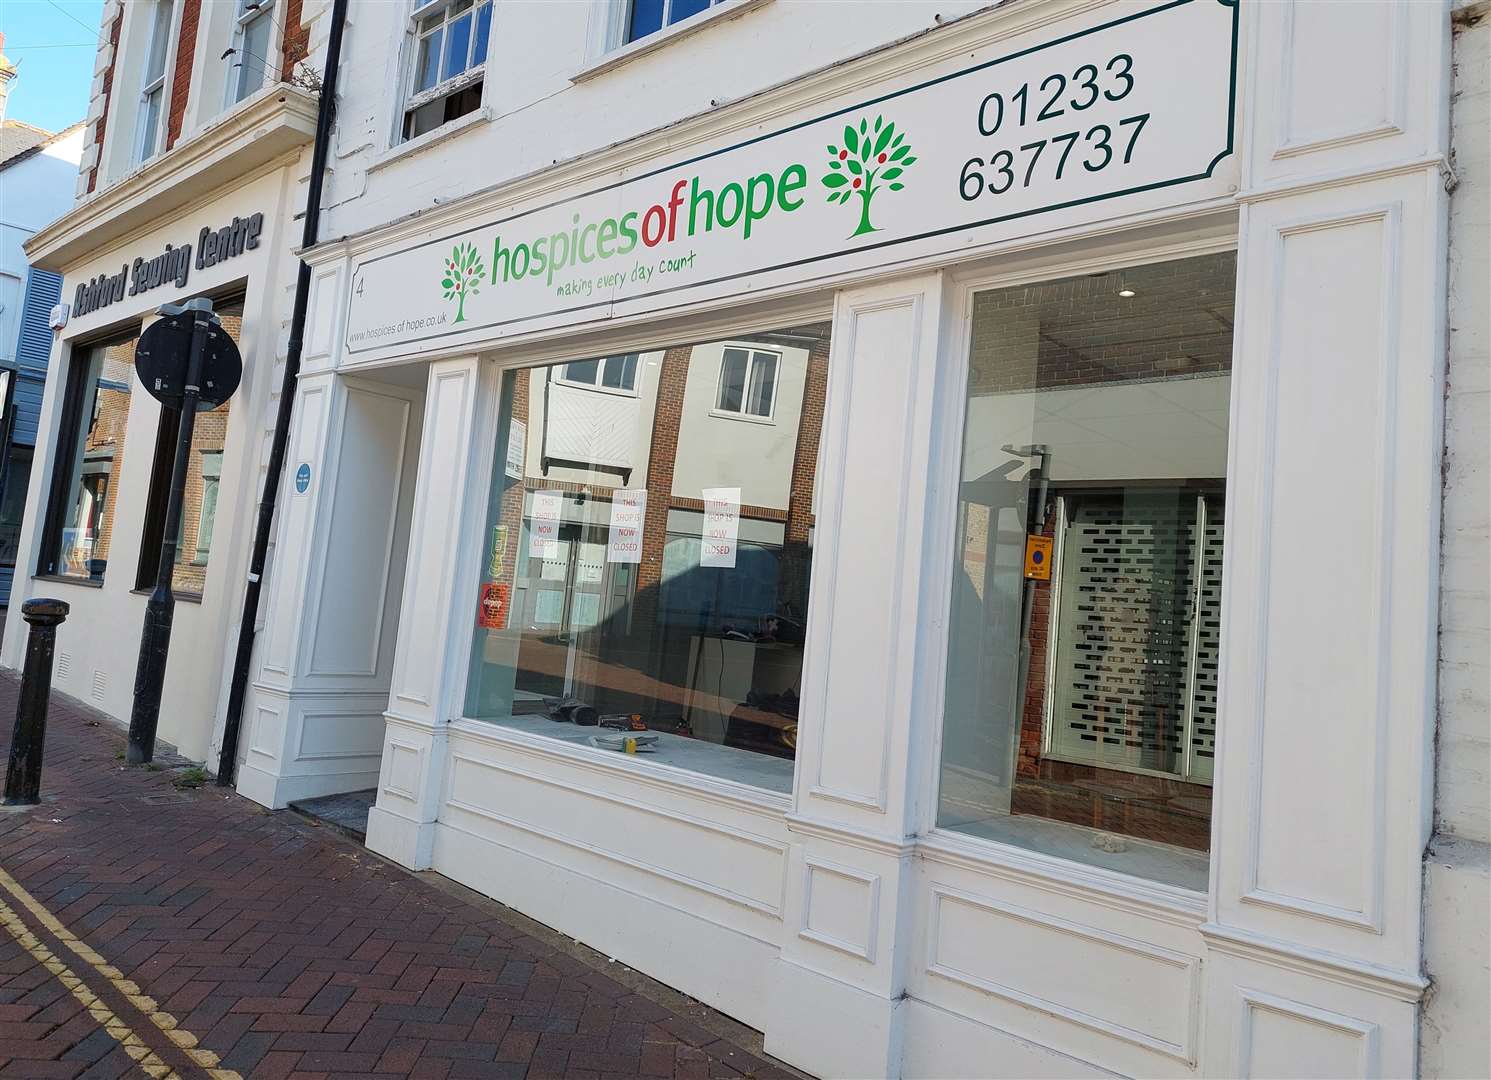 Hospices of Hope has left Ashford town centre